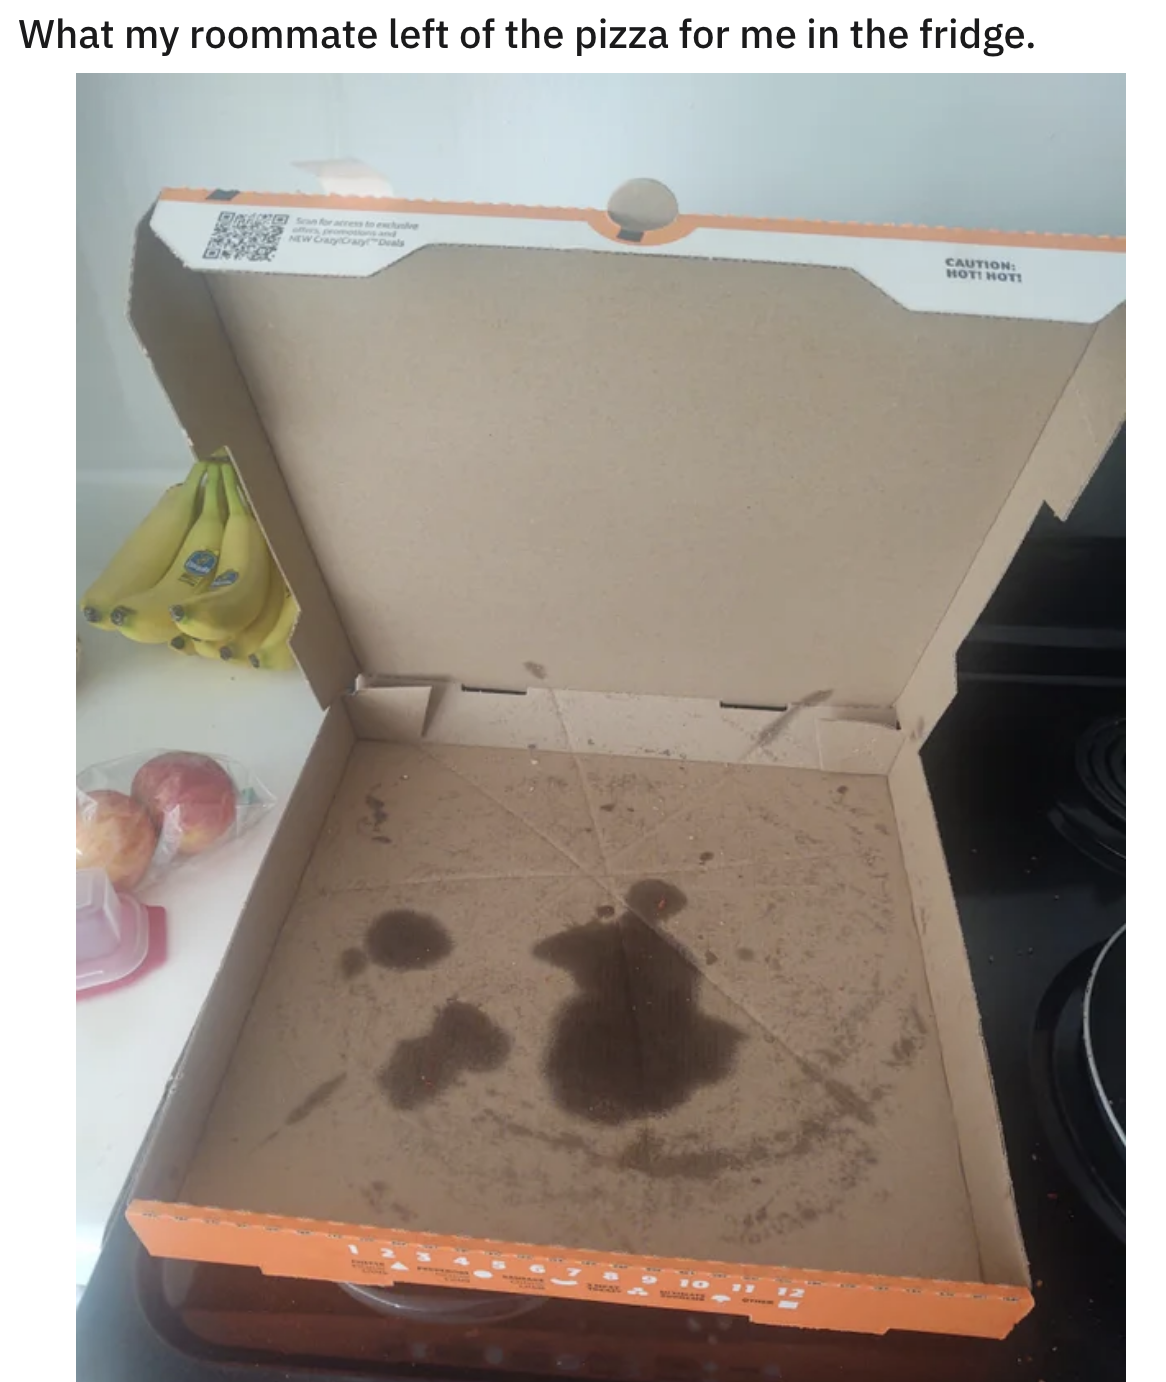 empty pizza box on the kitchen counter